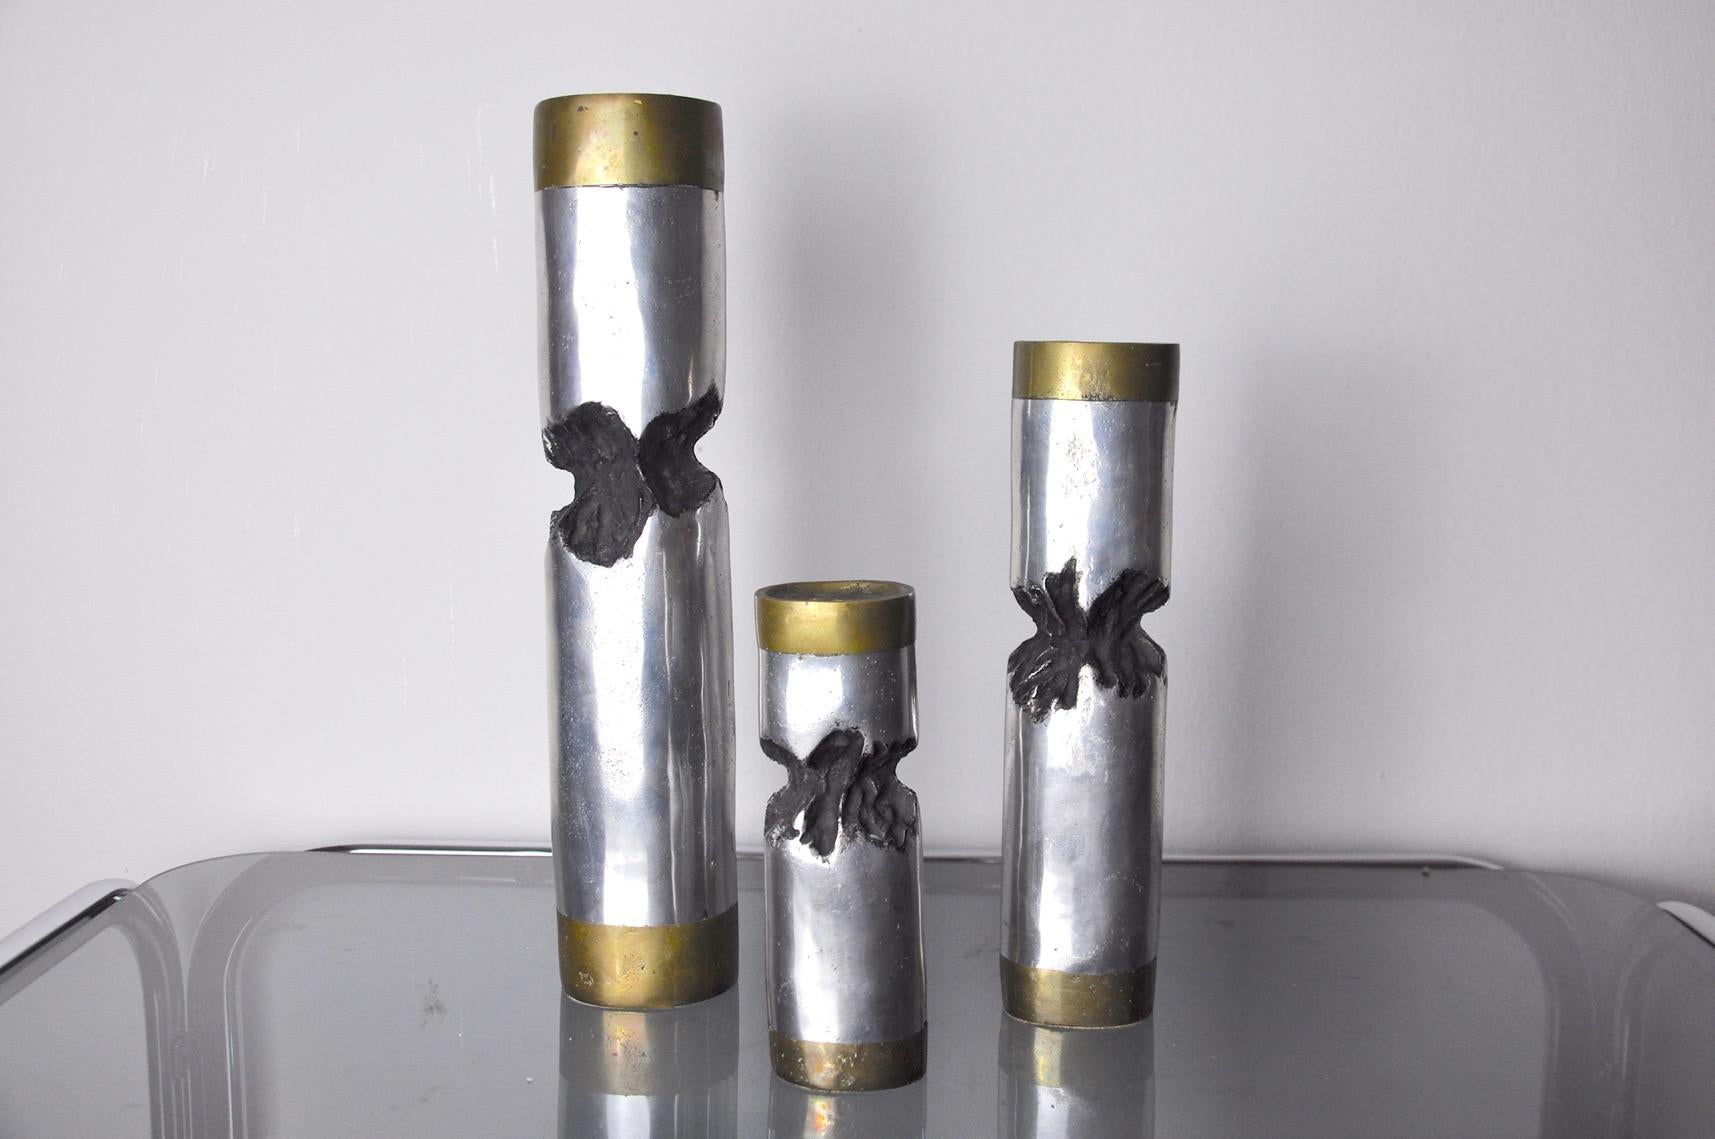 Superb set of brutalized candlesticks designed and made by the artist david marshall around the 70s, spain. Rare works by the artist in brass and silver metal. 

 